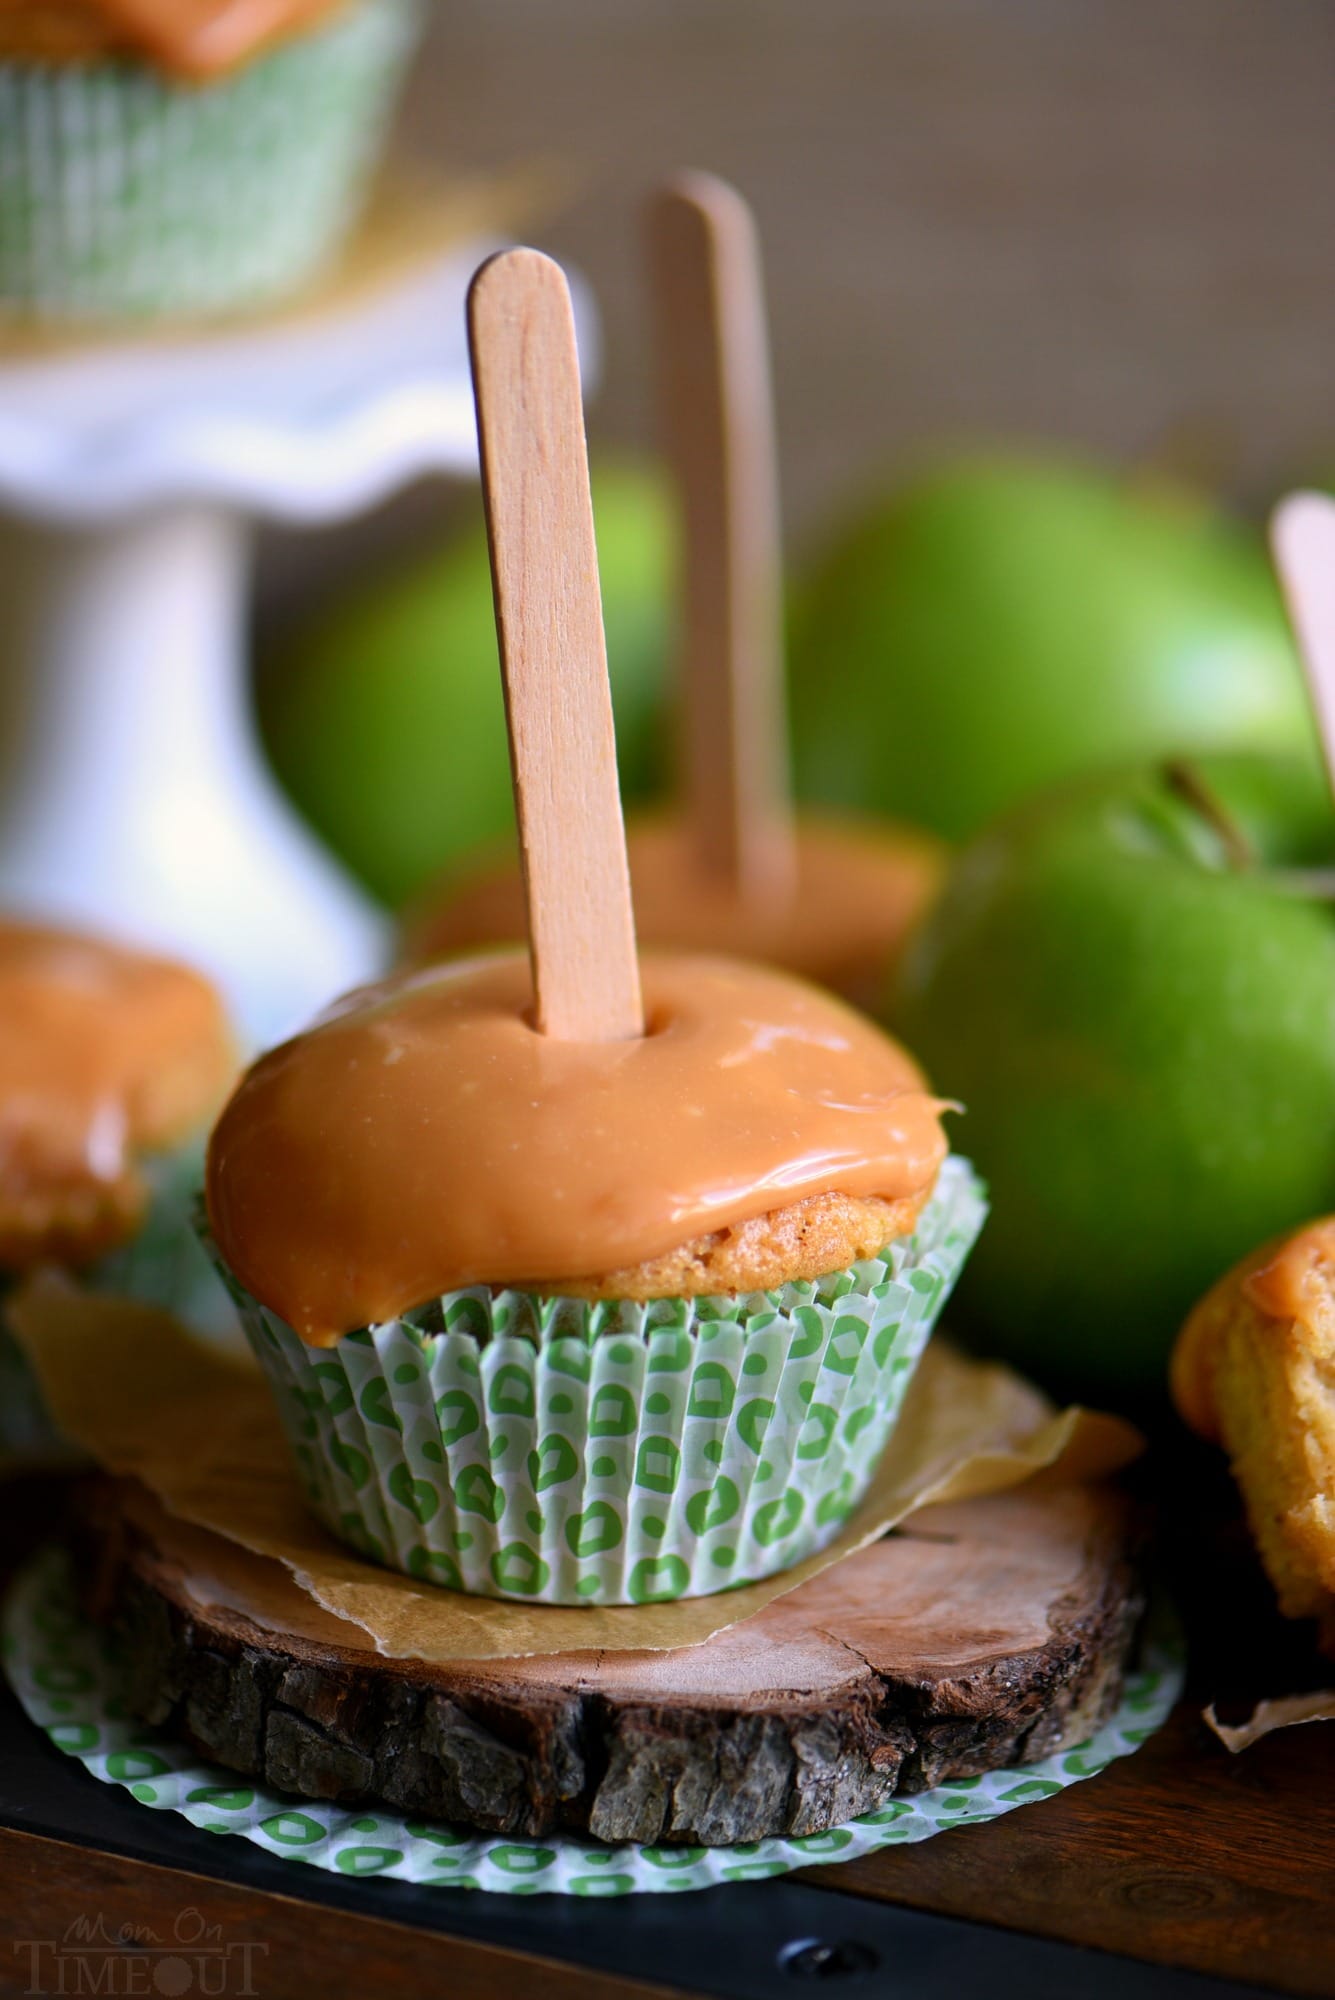 There is no better way to usher in fall than with these delicious Caramel Apple Cupcakes. Moist cupcakes loaded with apples and applesauce for double the apple flavor. A decadent caramel frosting tops them off beautifully. The perfect fall treat! Popsicle sticks not optional. // Mom On Timeout